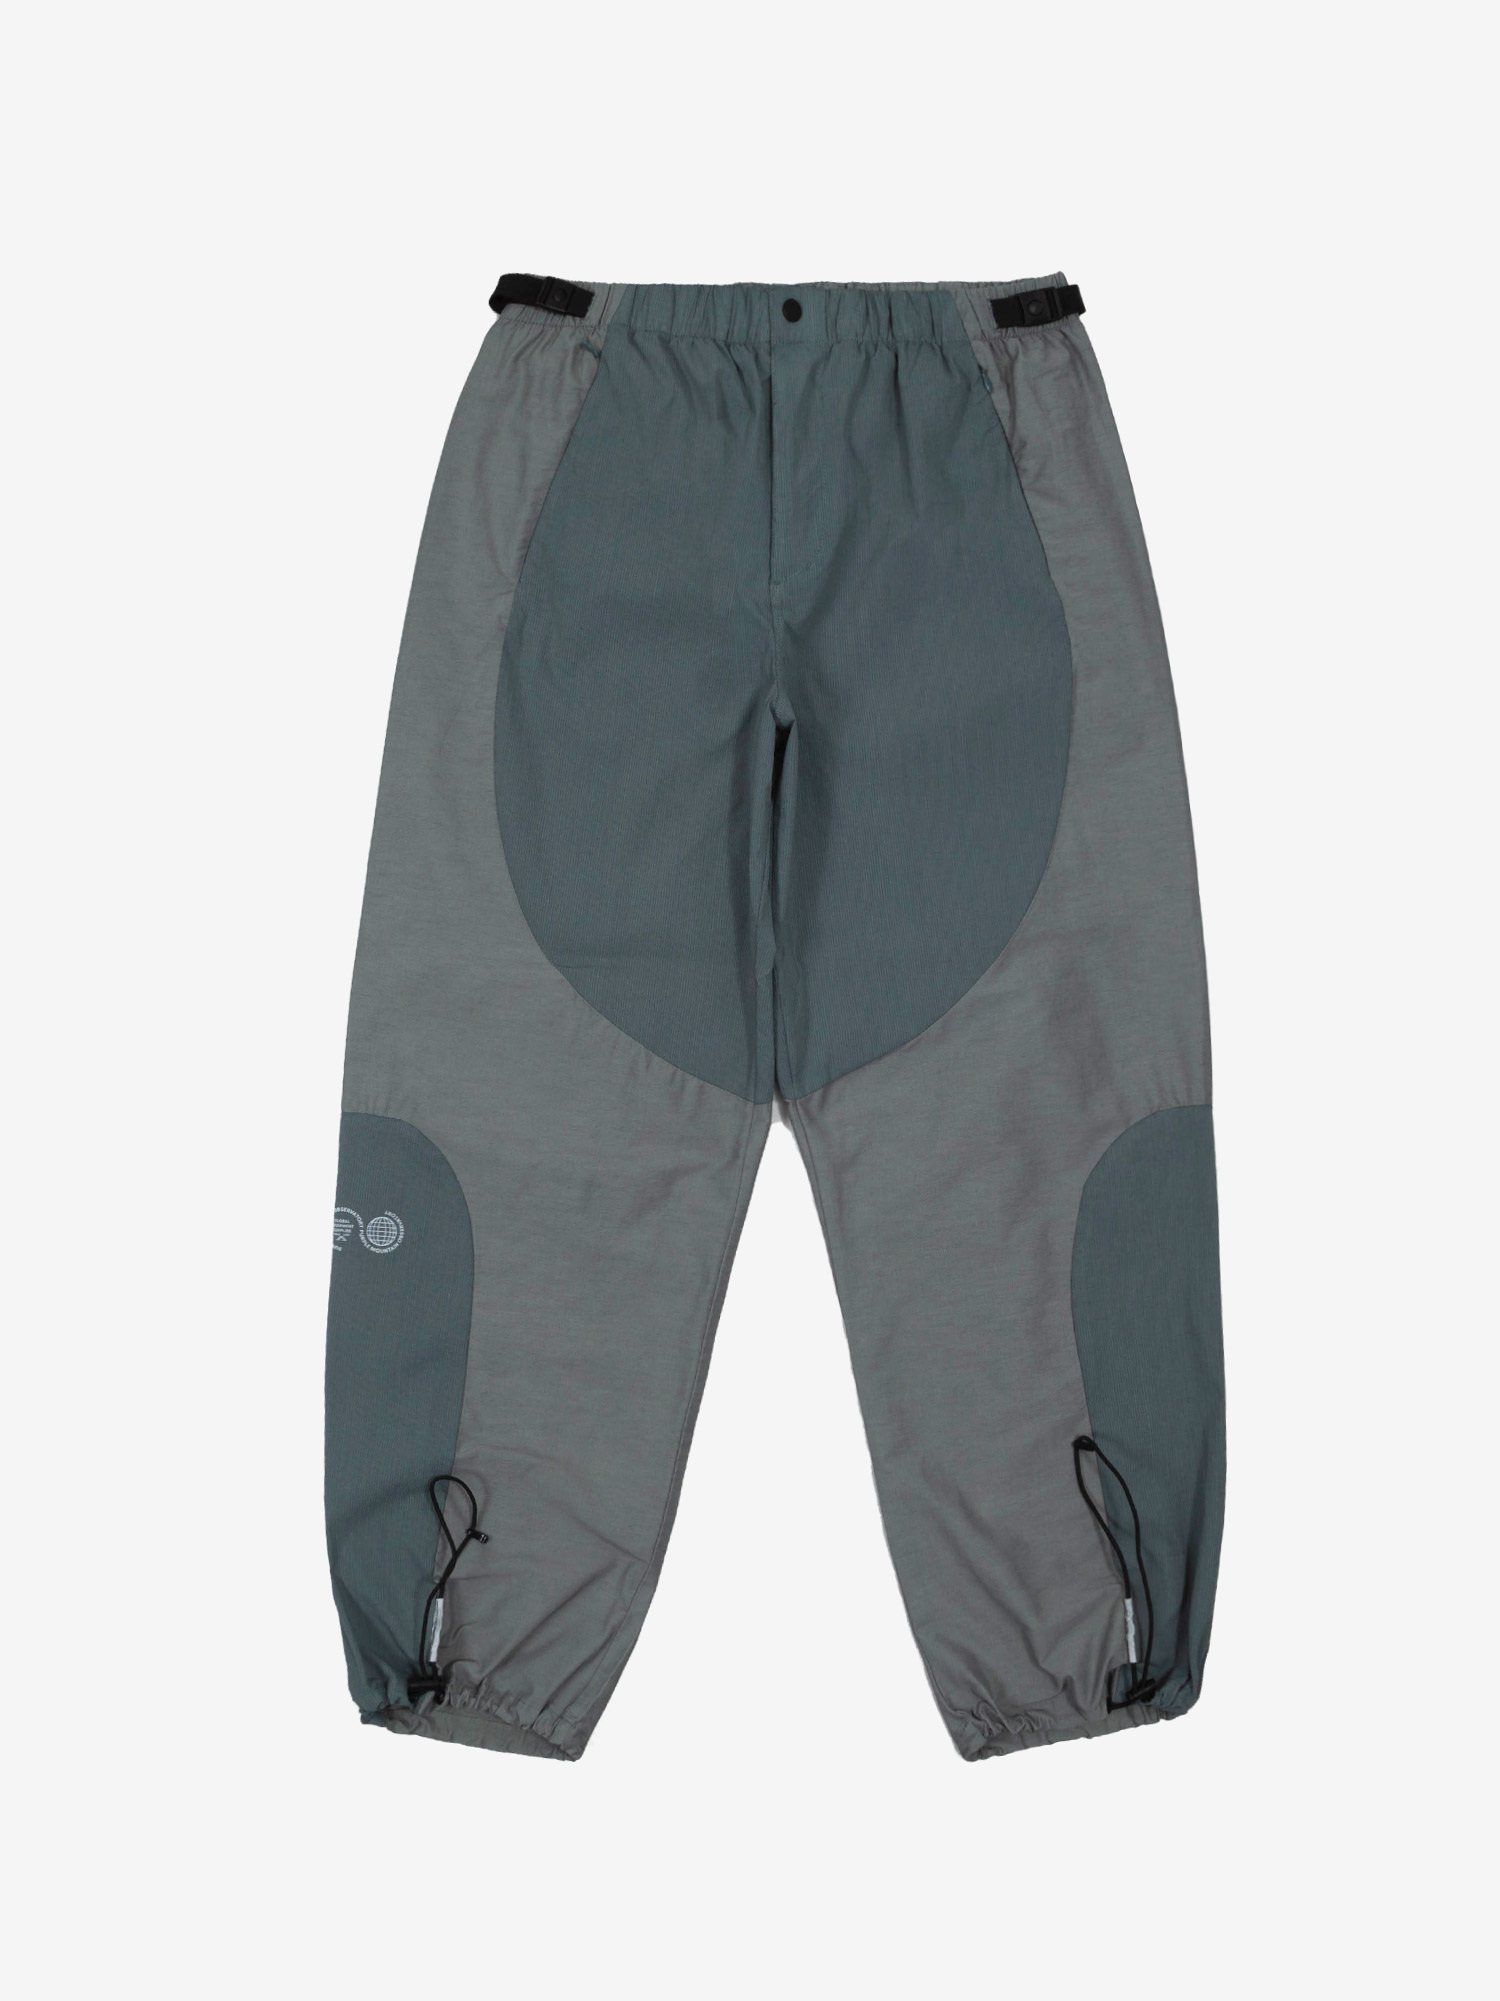 Featured image for “BLOCKED HIKING PANT TEAL”